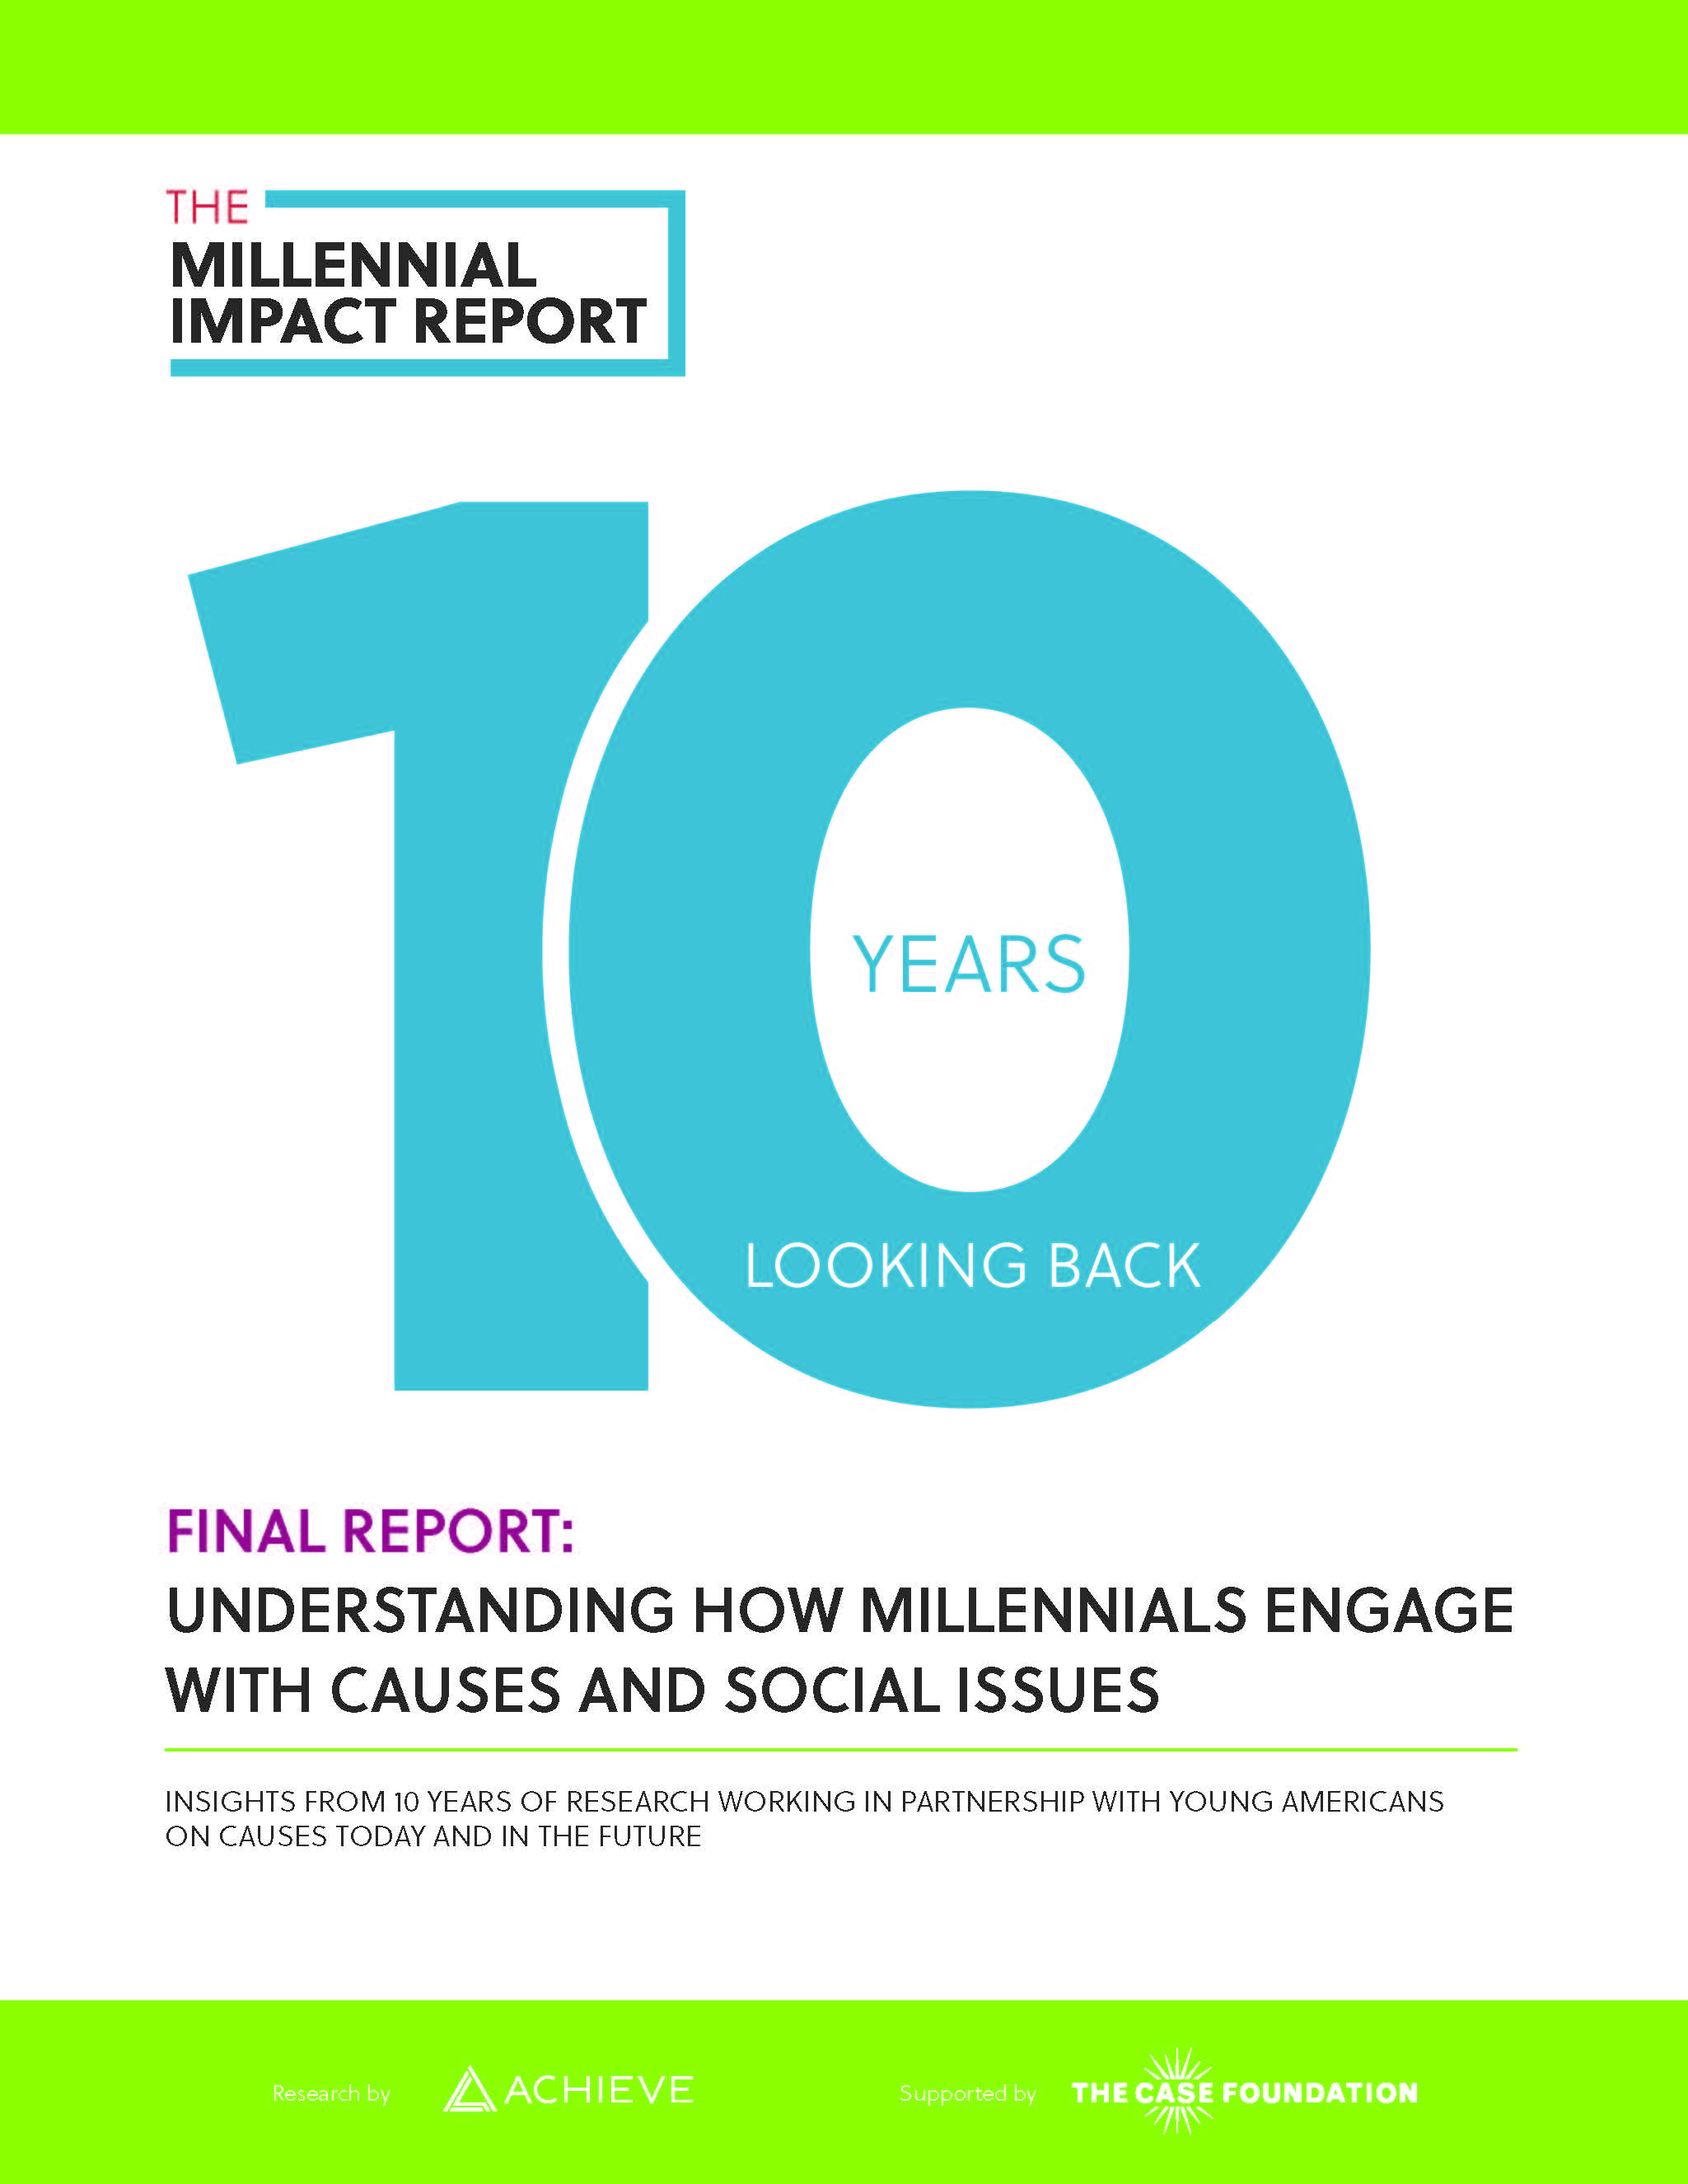 The Millennial Impact Report – 10 Year Looking Back